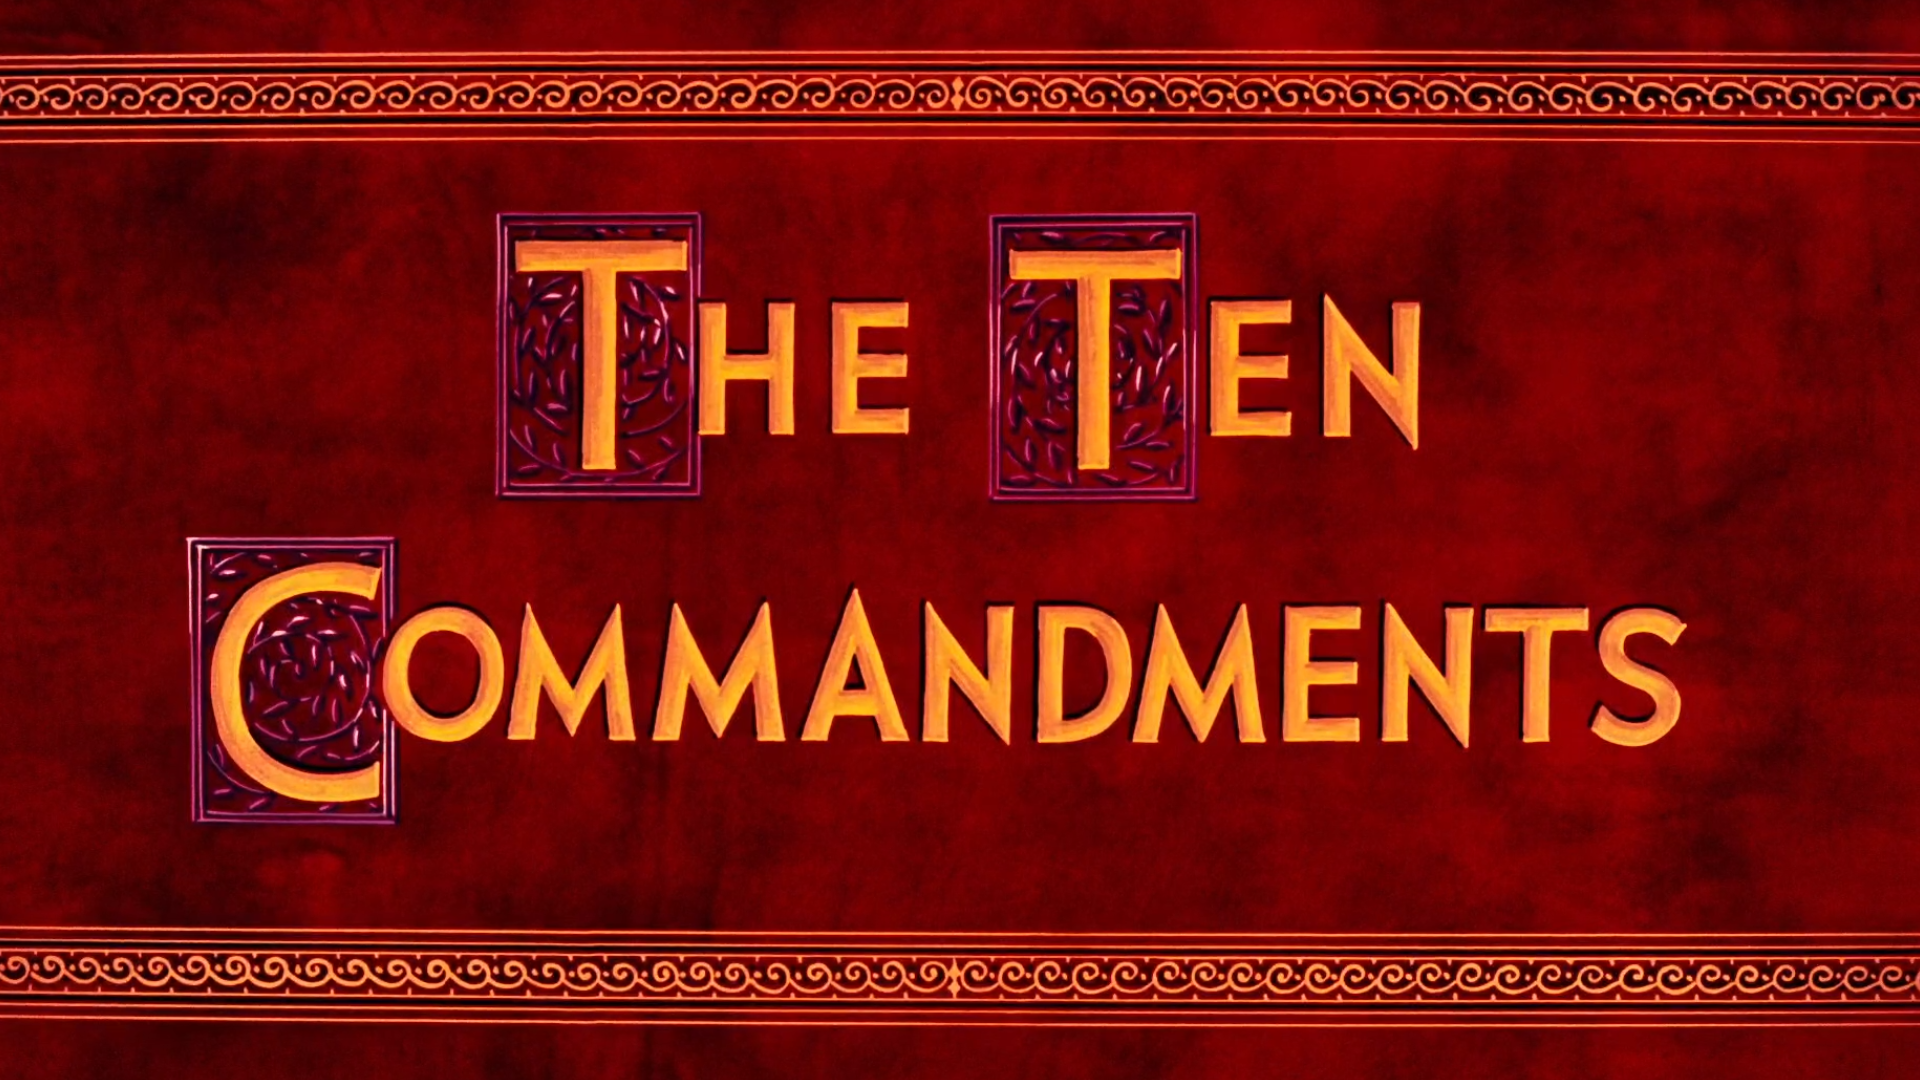 Paramount Home Entertainment presents Cecil B. DeMille’s 1956 epic "The Ten Commandments" on 4K Ultra HD for the first time in March 2021.